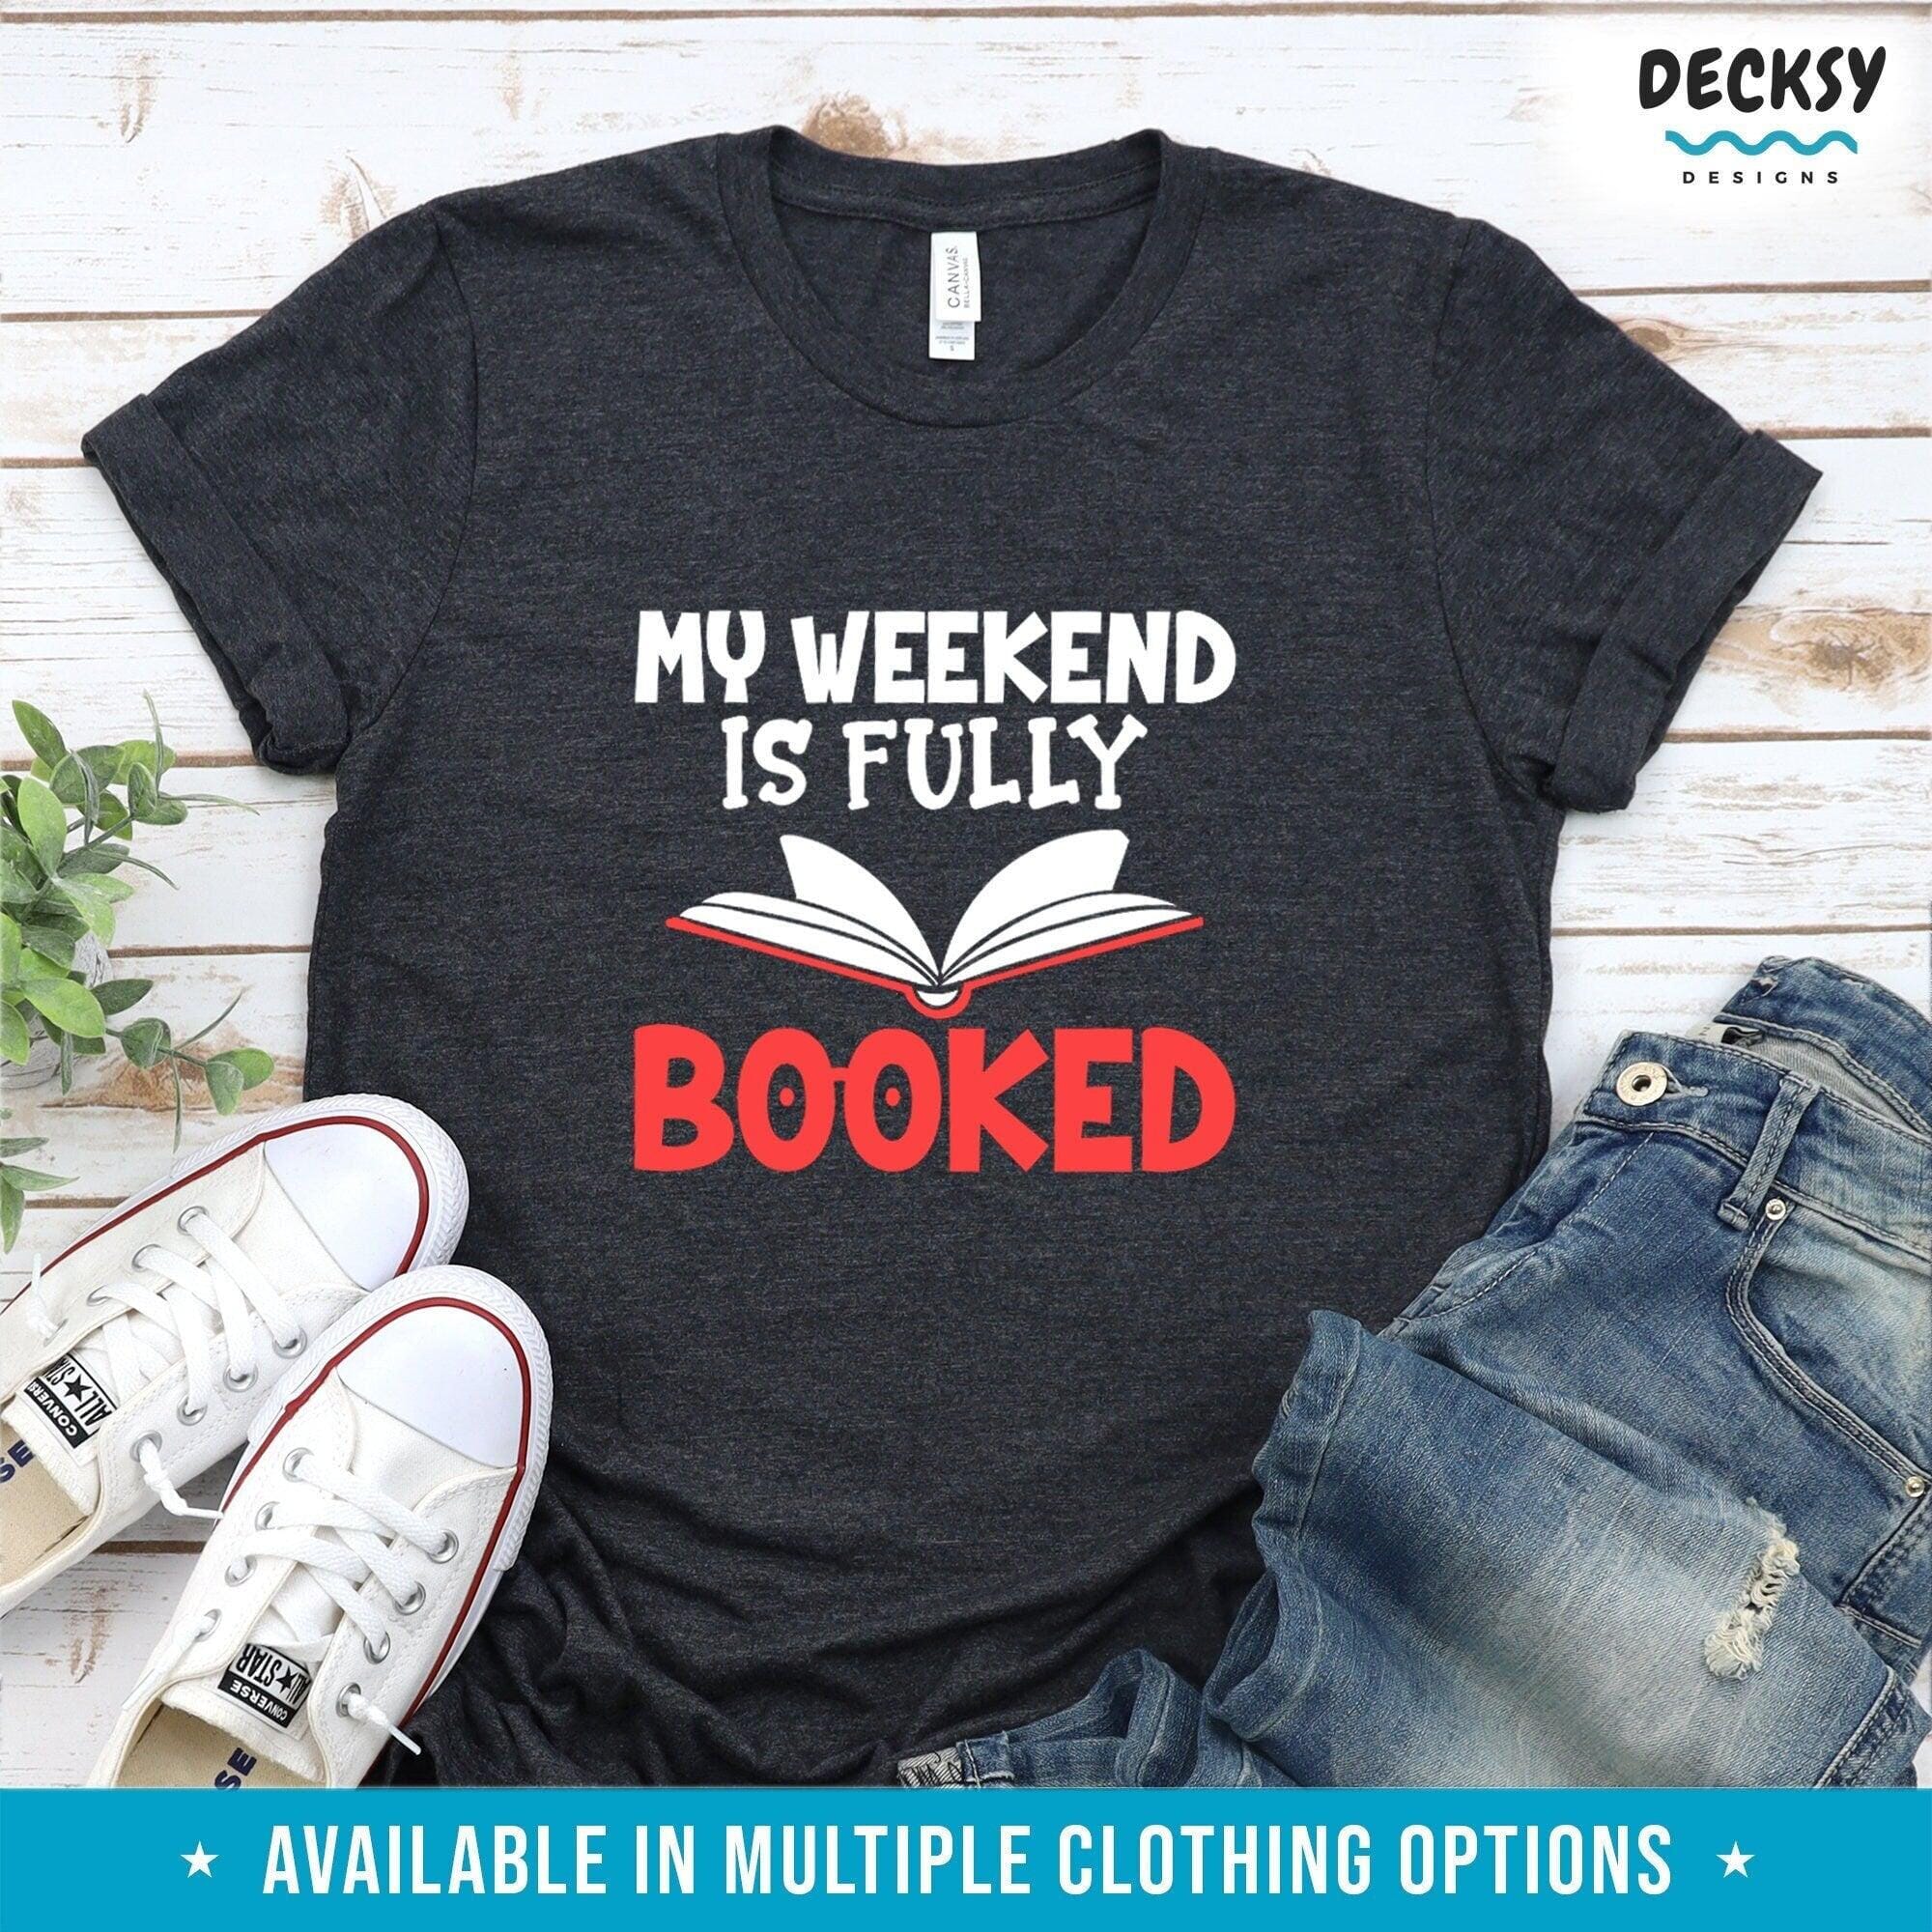 Book Worm Shirt, Reader Gift-Clothing:Gender-Neutral Adult Clothing:Tops & Tees:T-shirts:Graphic Tees-DecksyDesigns